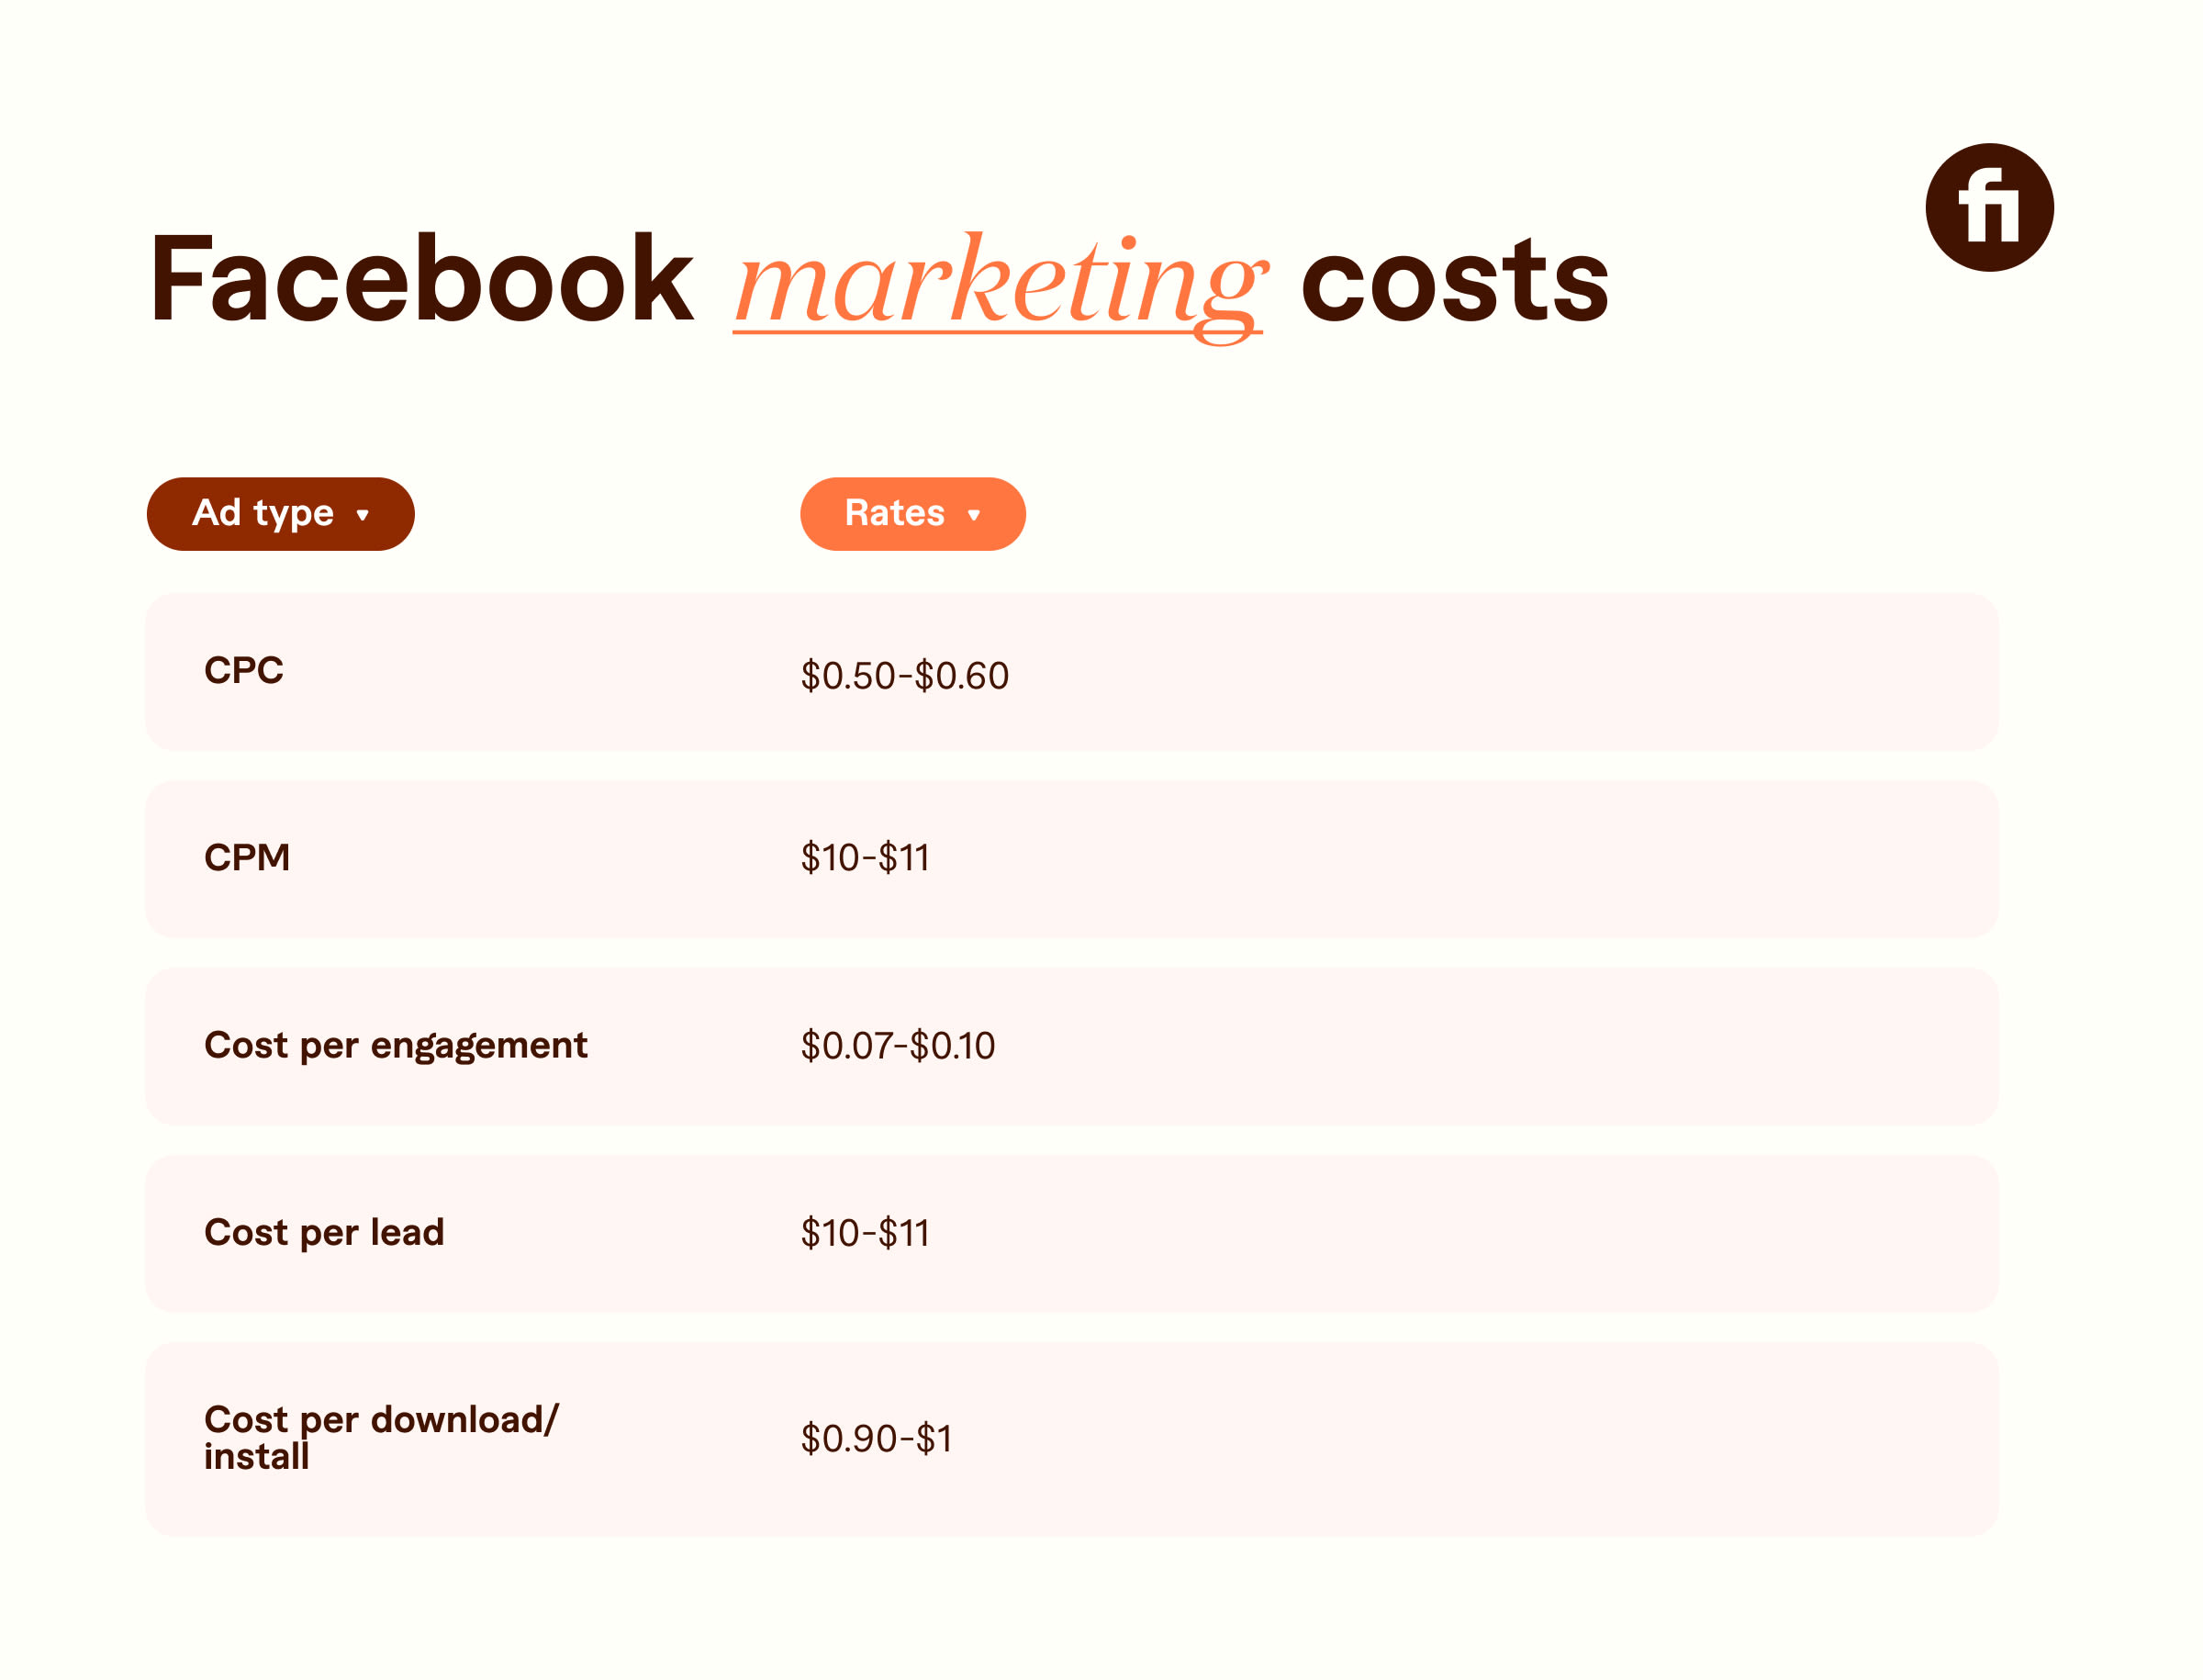 Facebook marketing costs graph